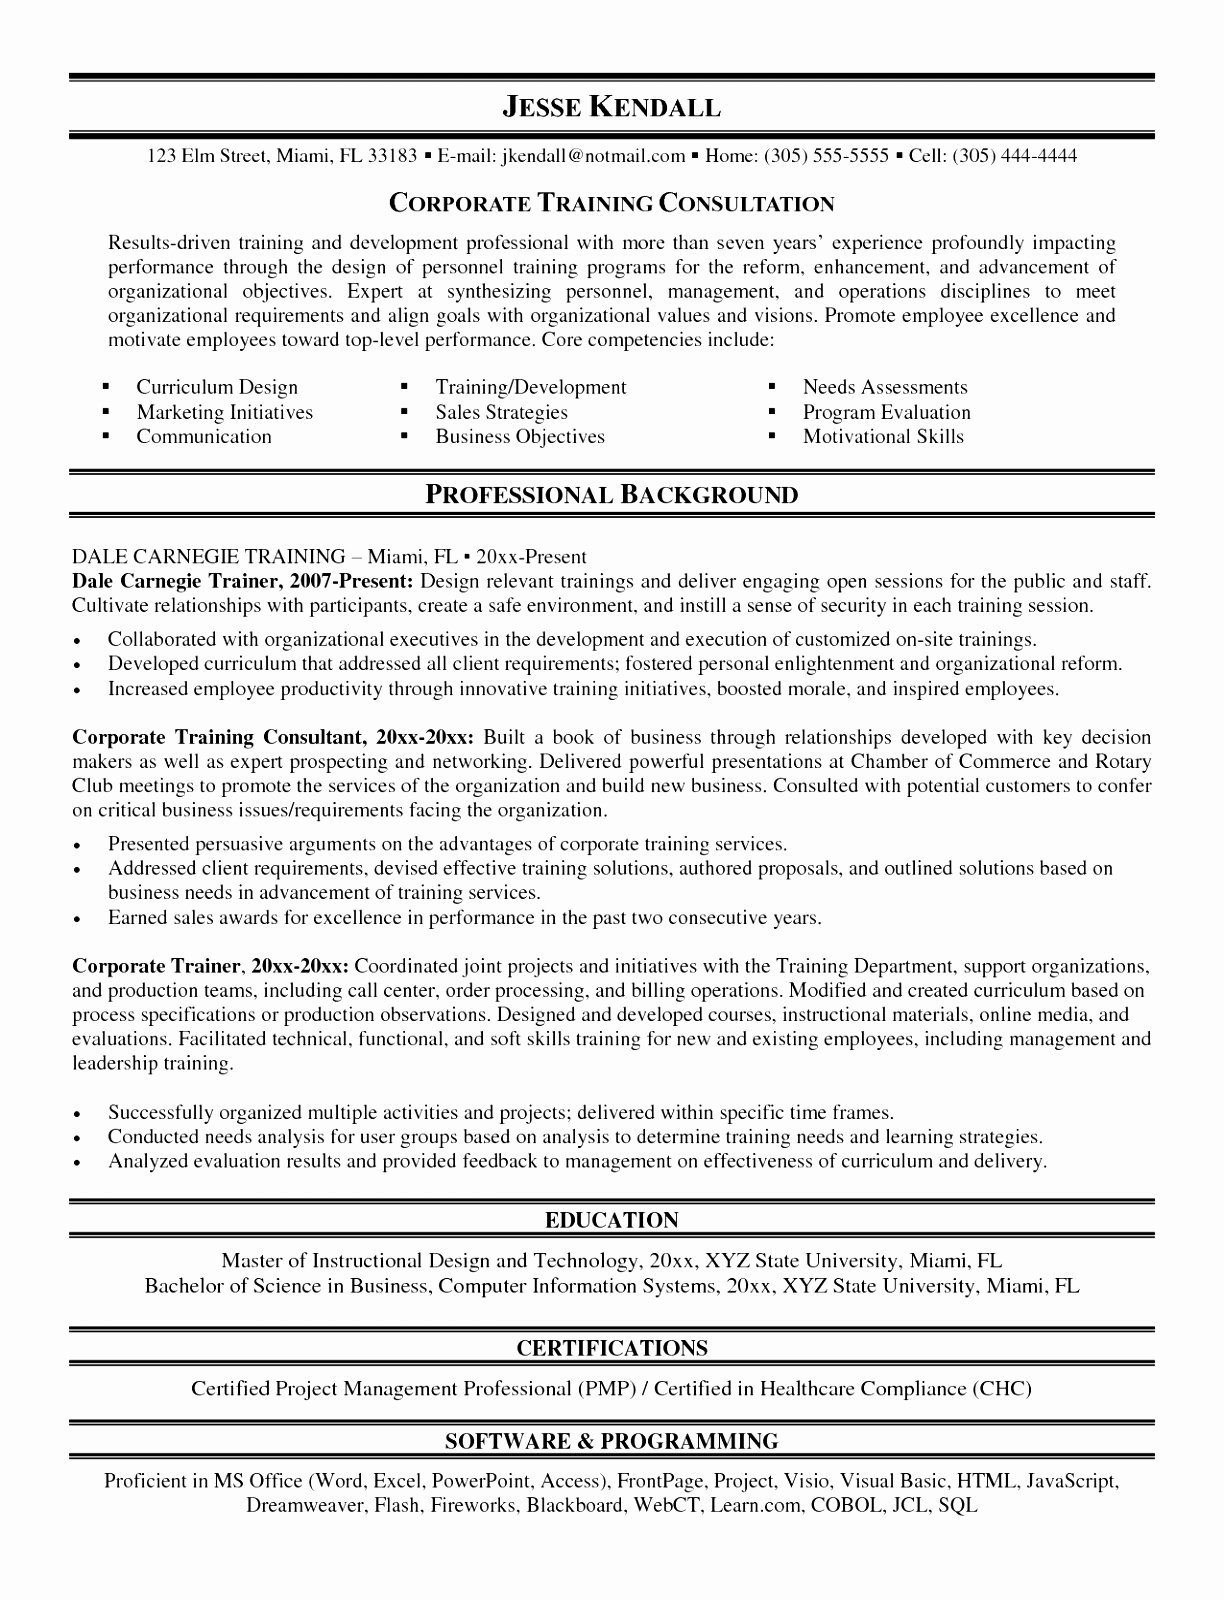 Personal Trainer Resume Template Beautiful 6 Personal Training Session Plan Template topoy